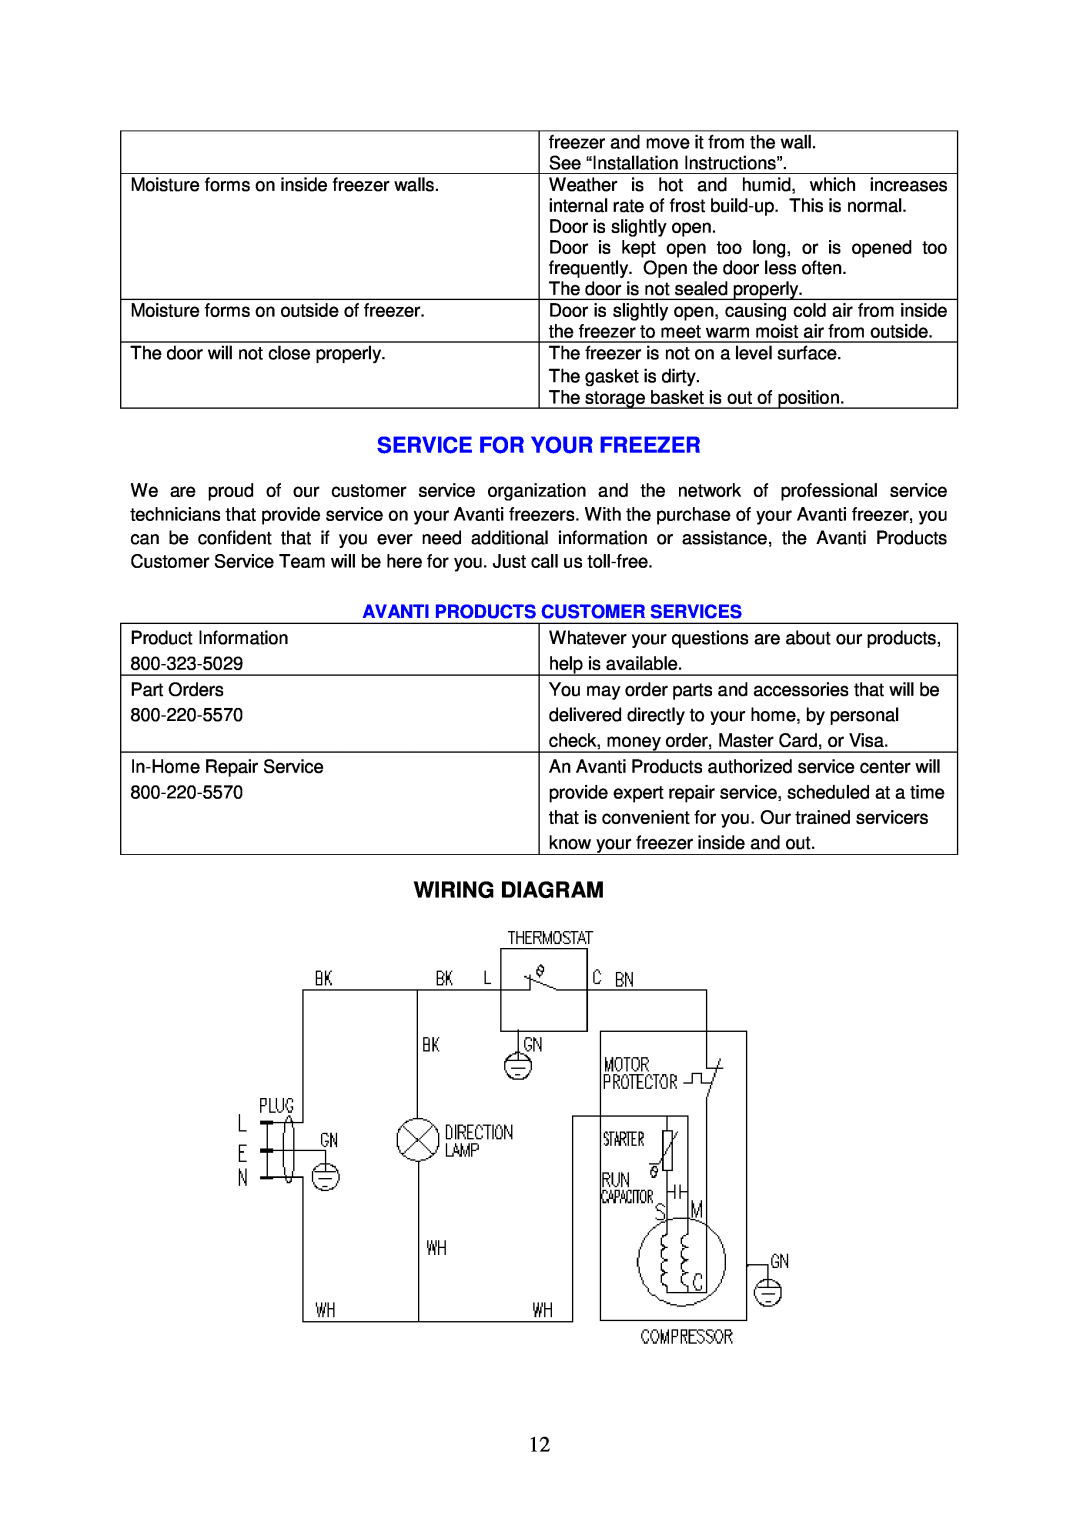 Avanti CF103 instruction manual Service For Your Freezer, Wiring Diagram, Avanti Products Customer Services 